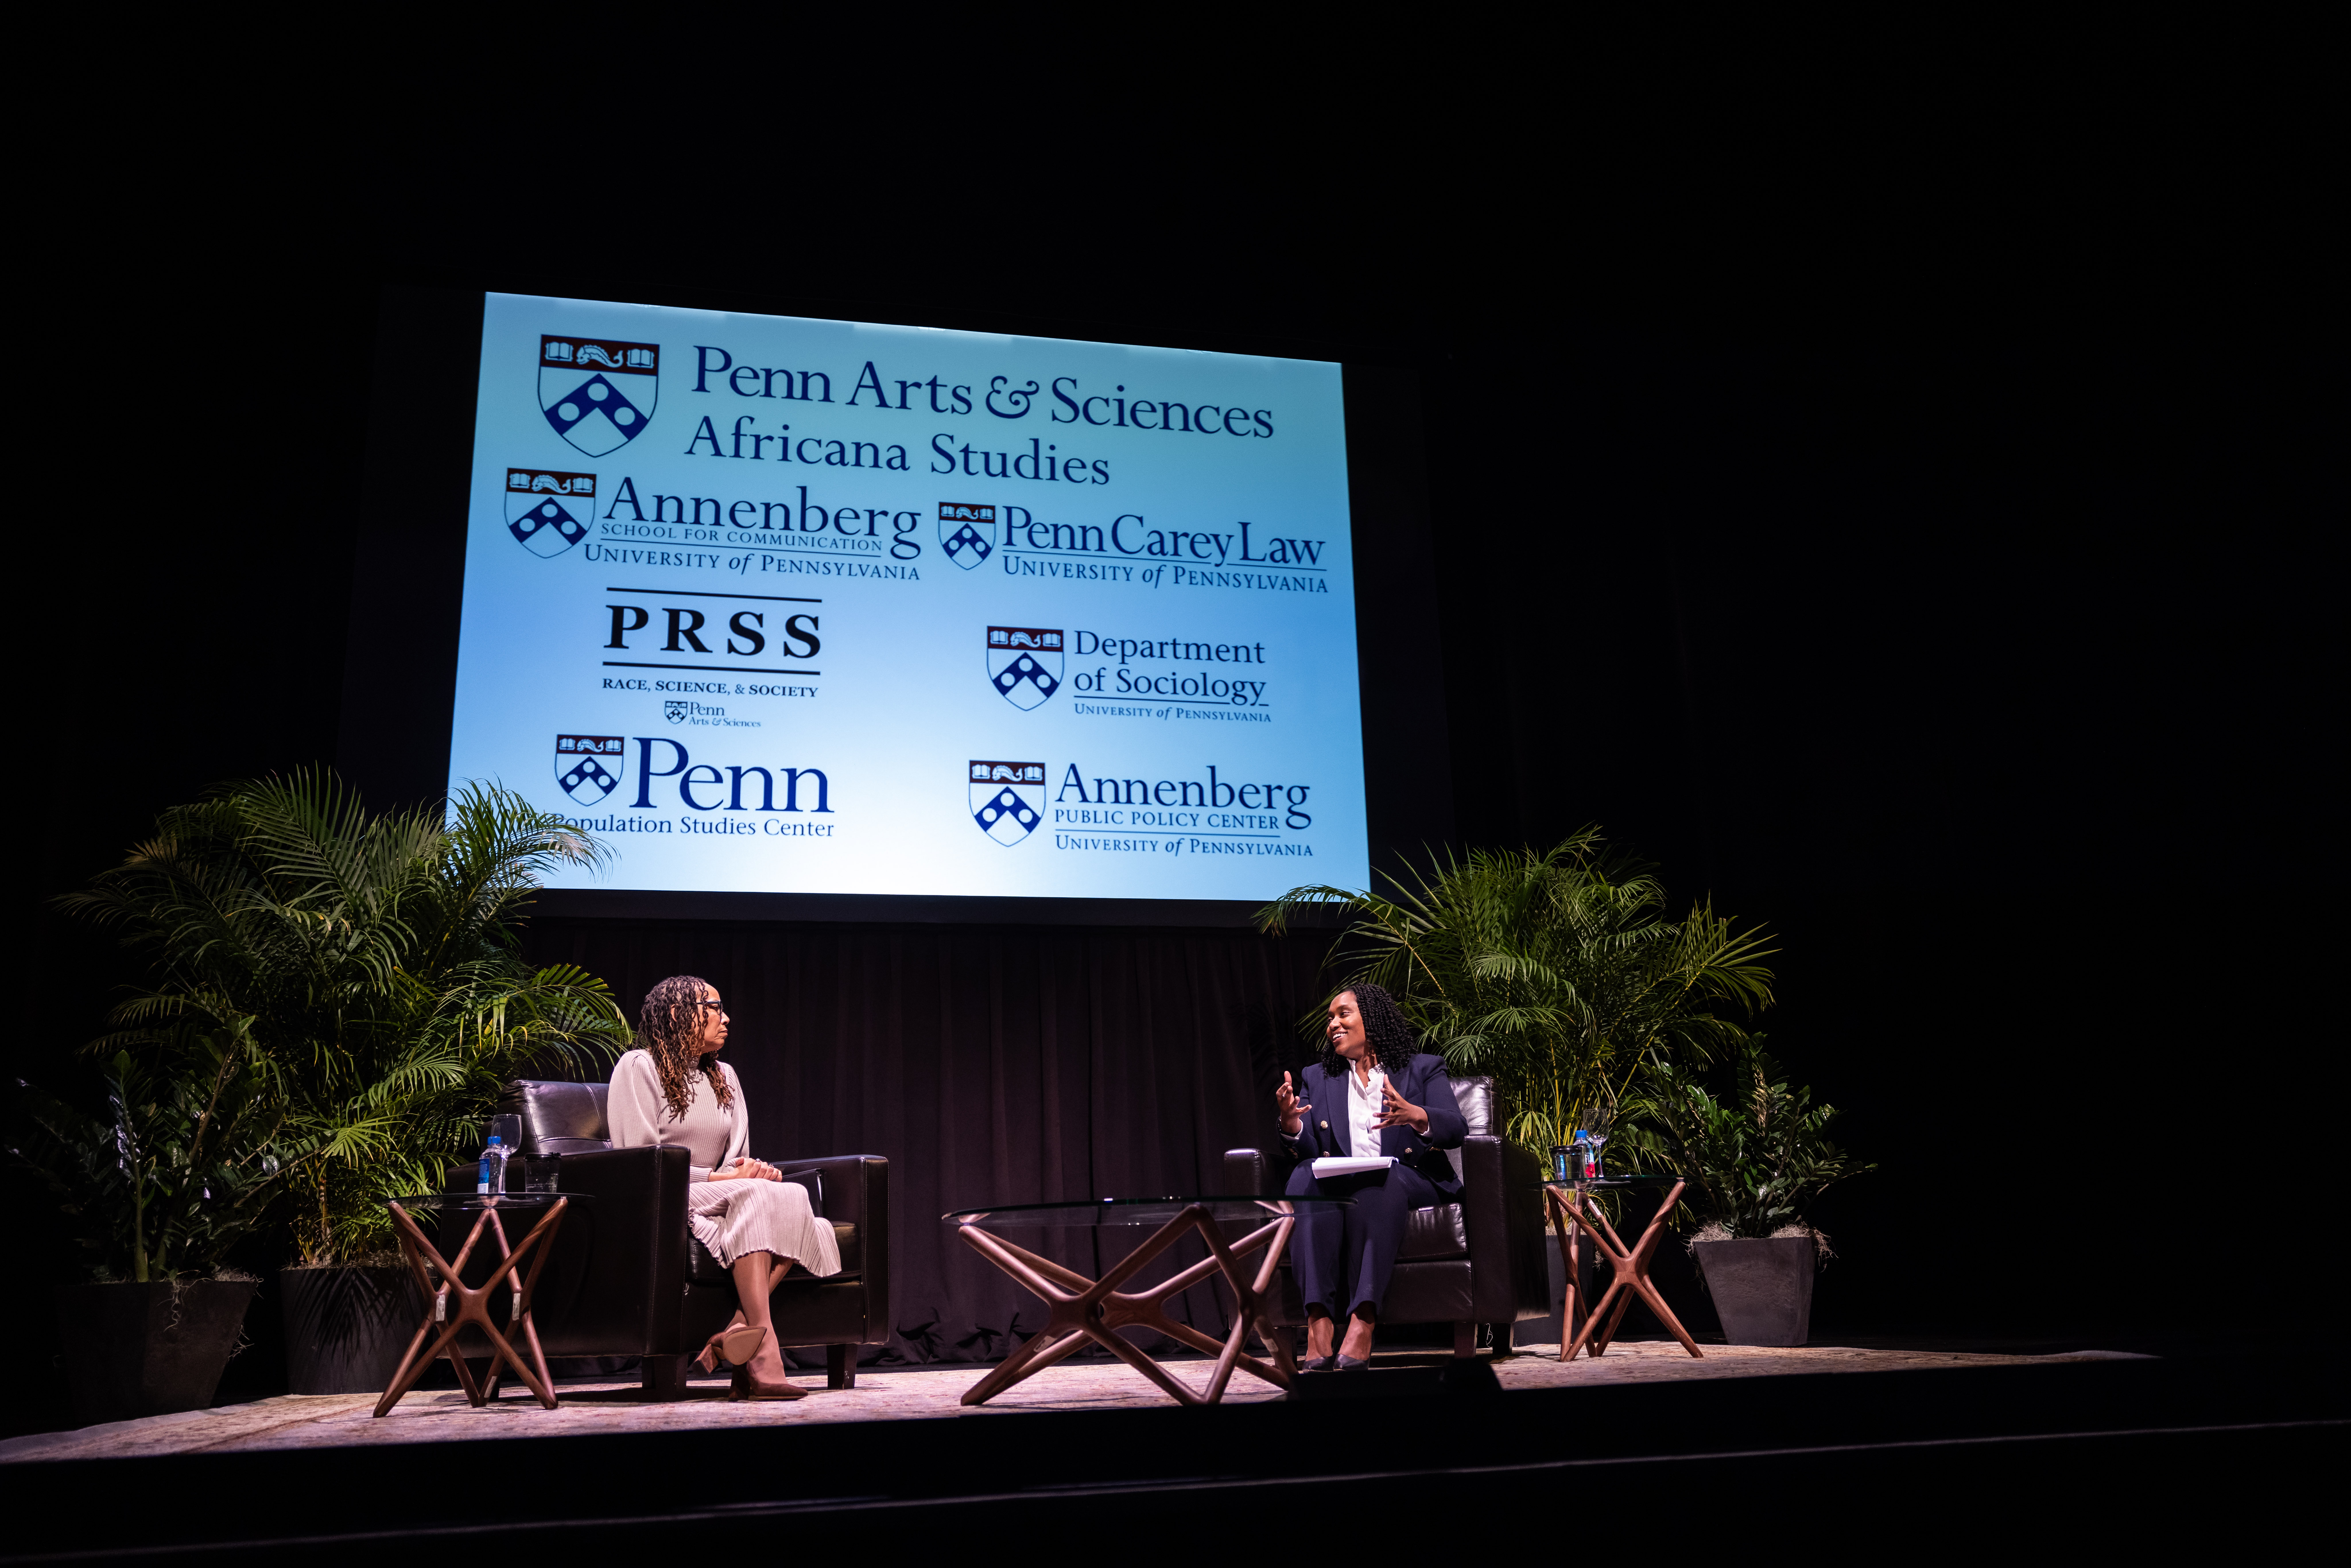 Dorothy Roberts and Marcia Chatelain sit under a screen with logos from Penn Arts & Sciences, Annenberg, Penn Carey Law, PRSS, and the Department of Sociology